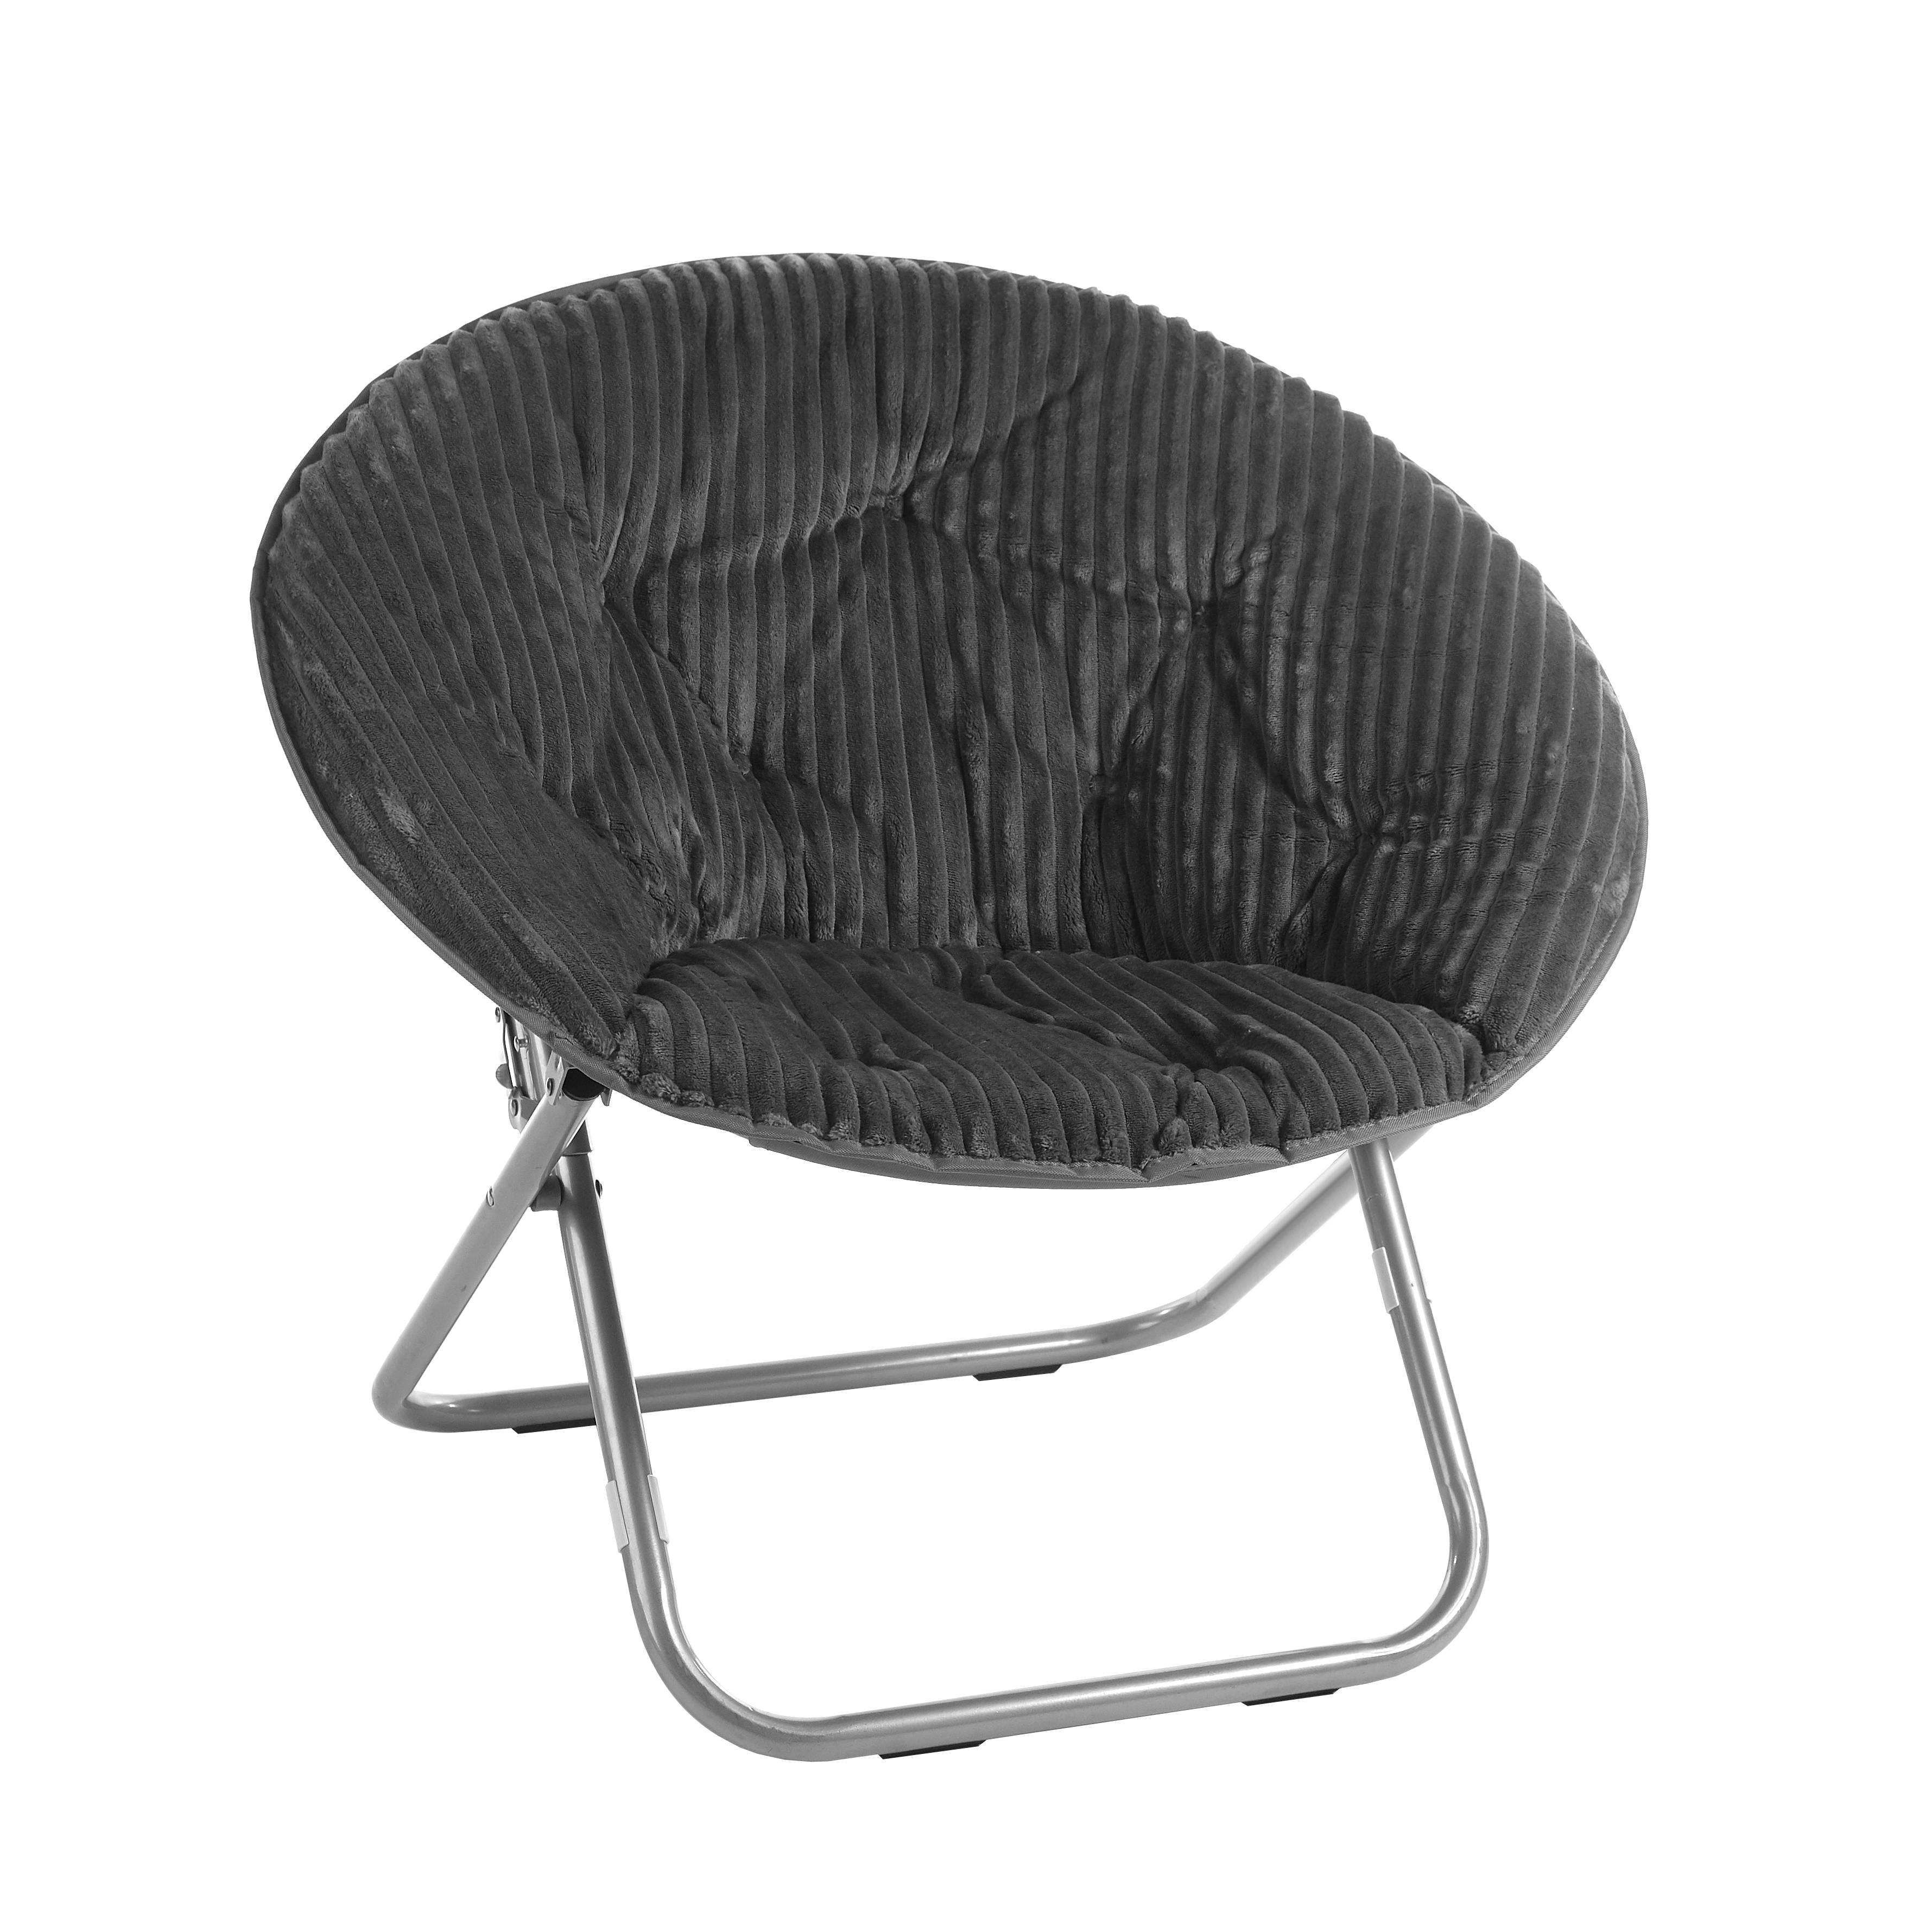 Urban Shop Corduroy Saucer Chair, Available in Multiple Colors - image 1 of 4